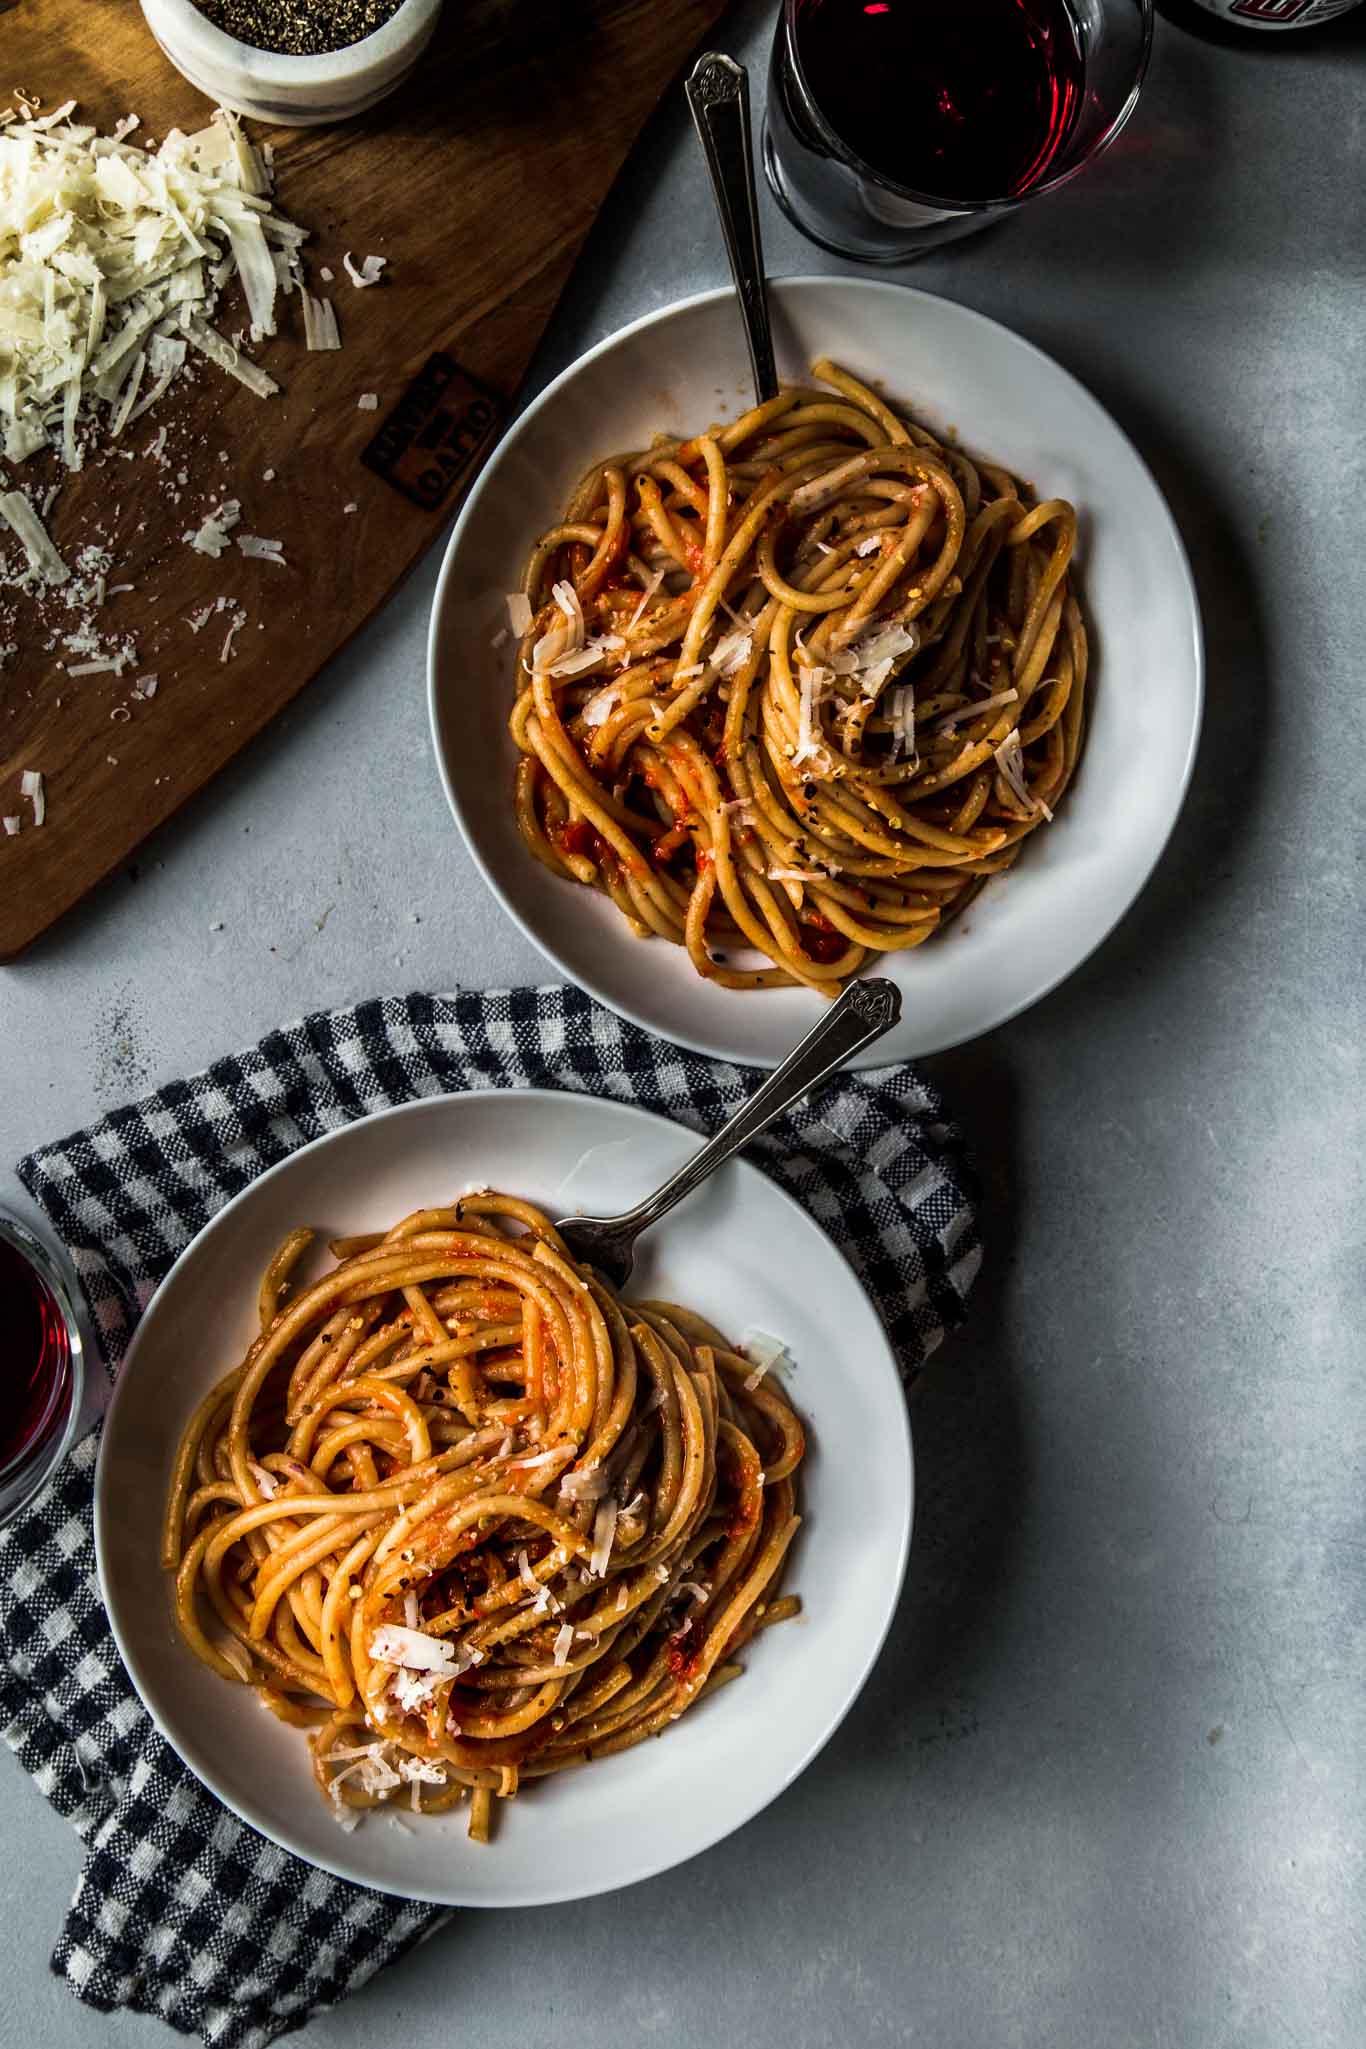 Two plates of pasta with roasted tomato sauce next to wine.